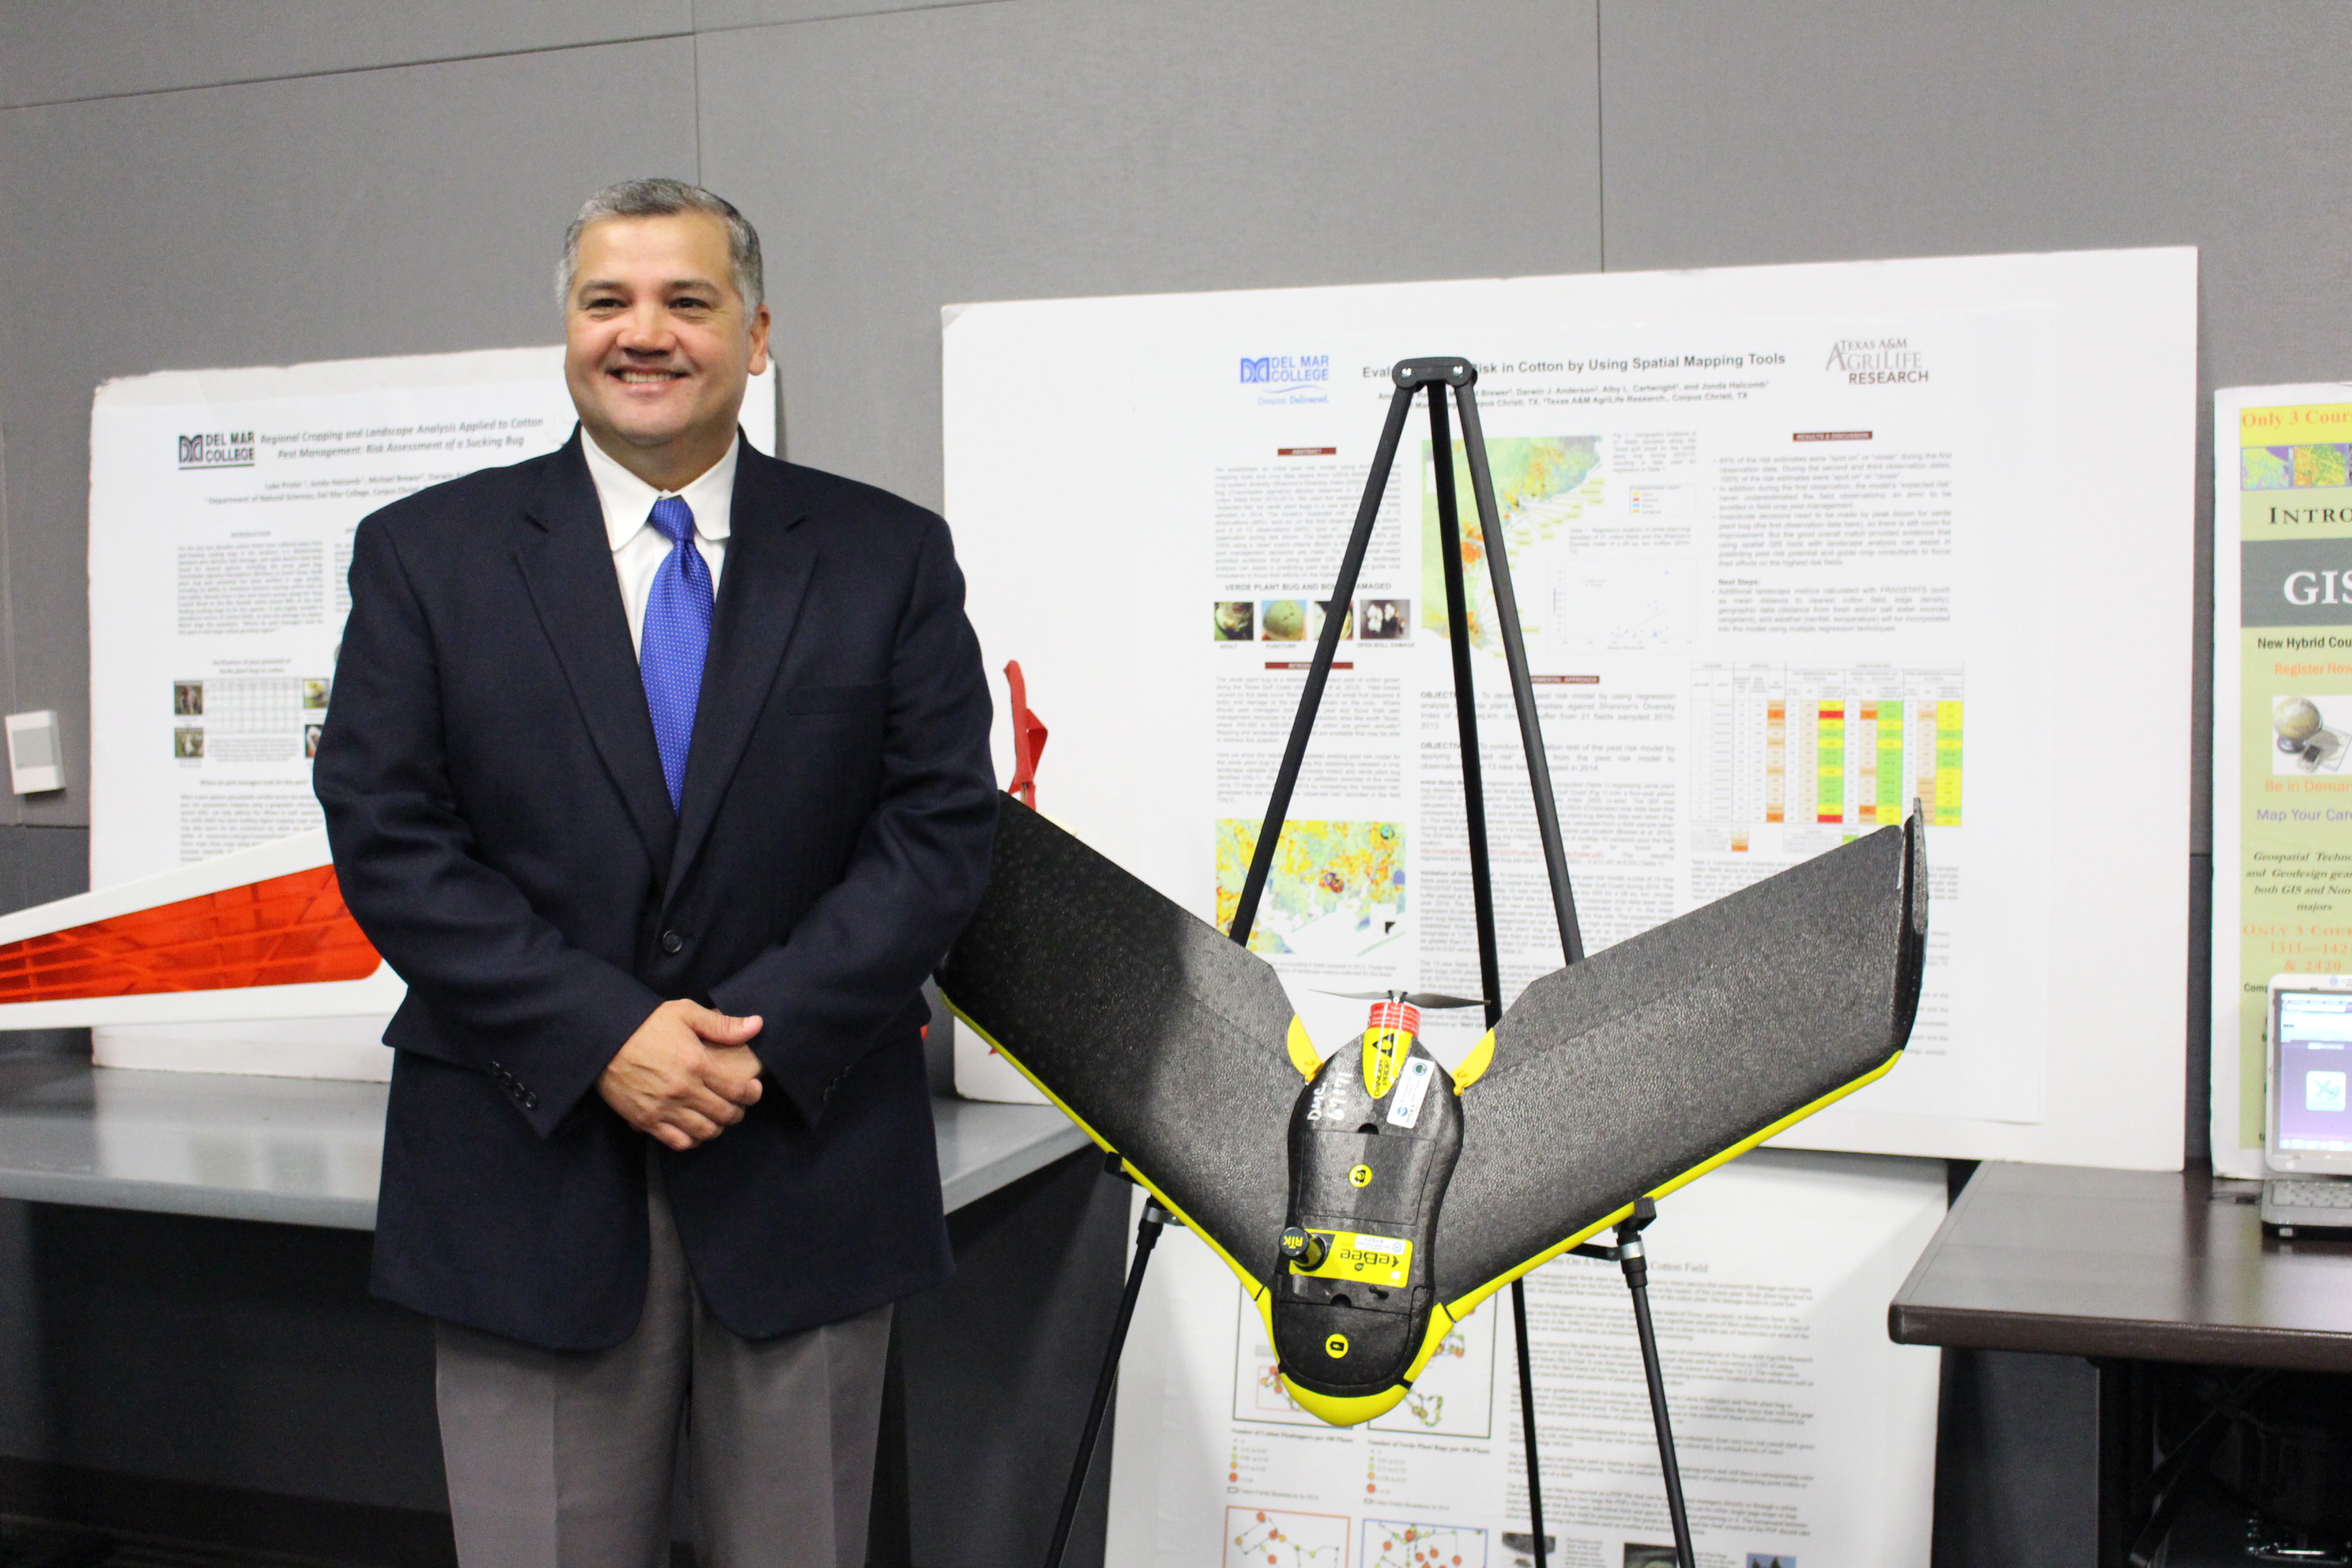 President Mark Escamilla stands next to Del Mar’s GIS drone at the event.